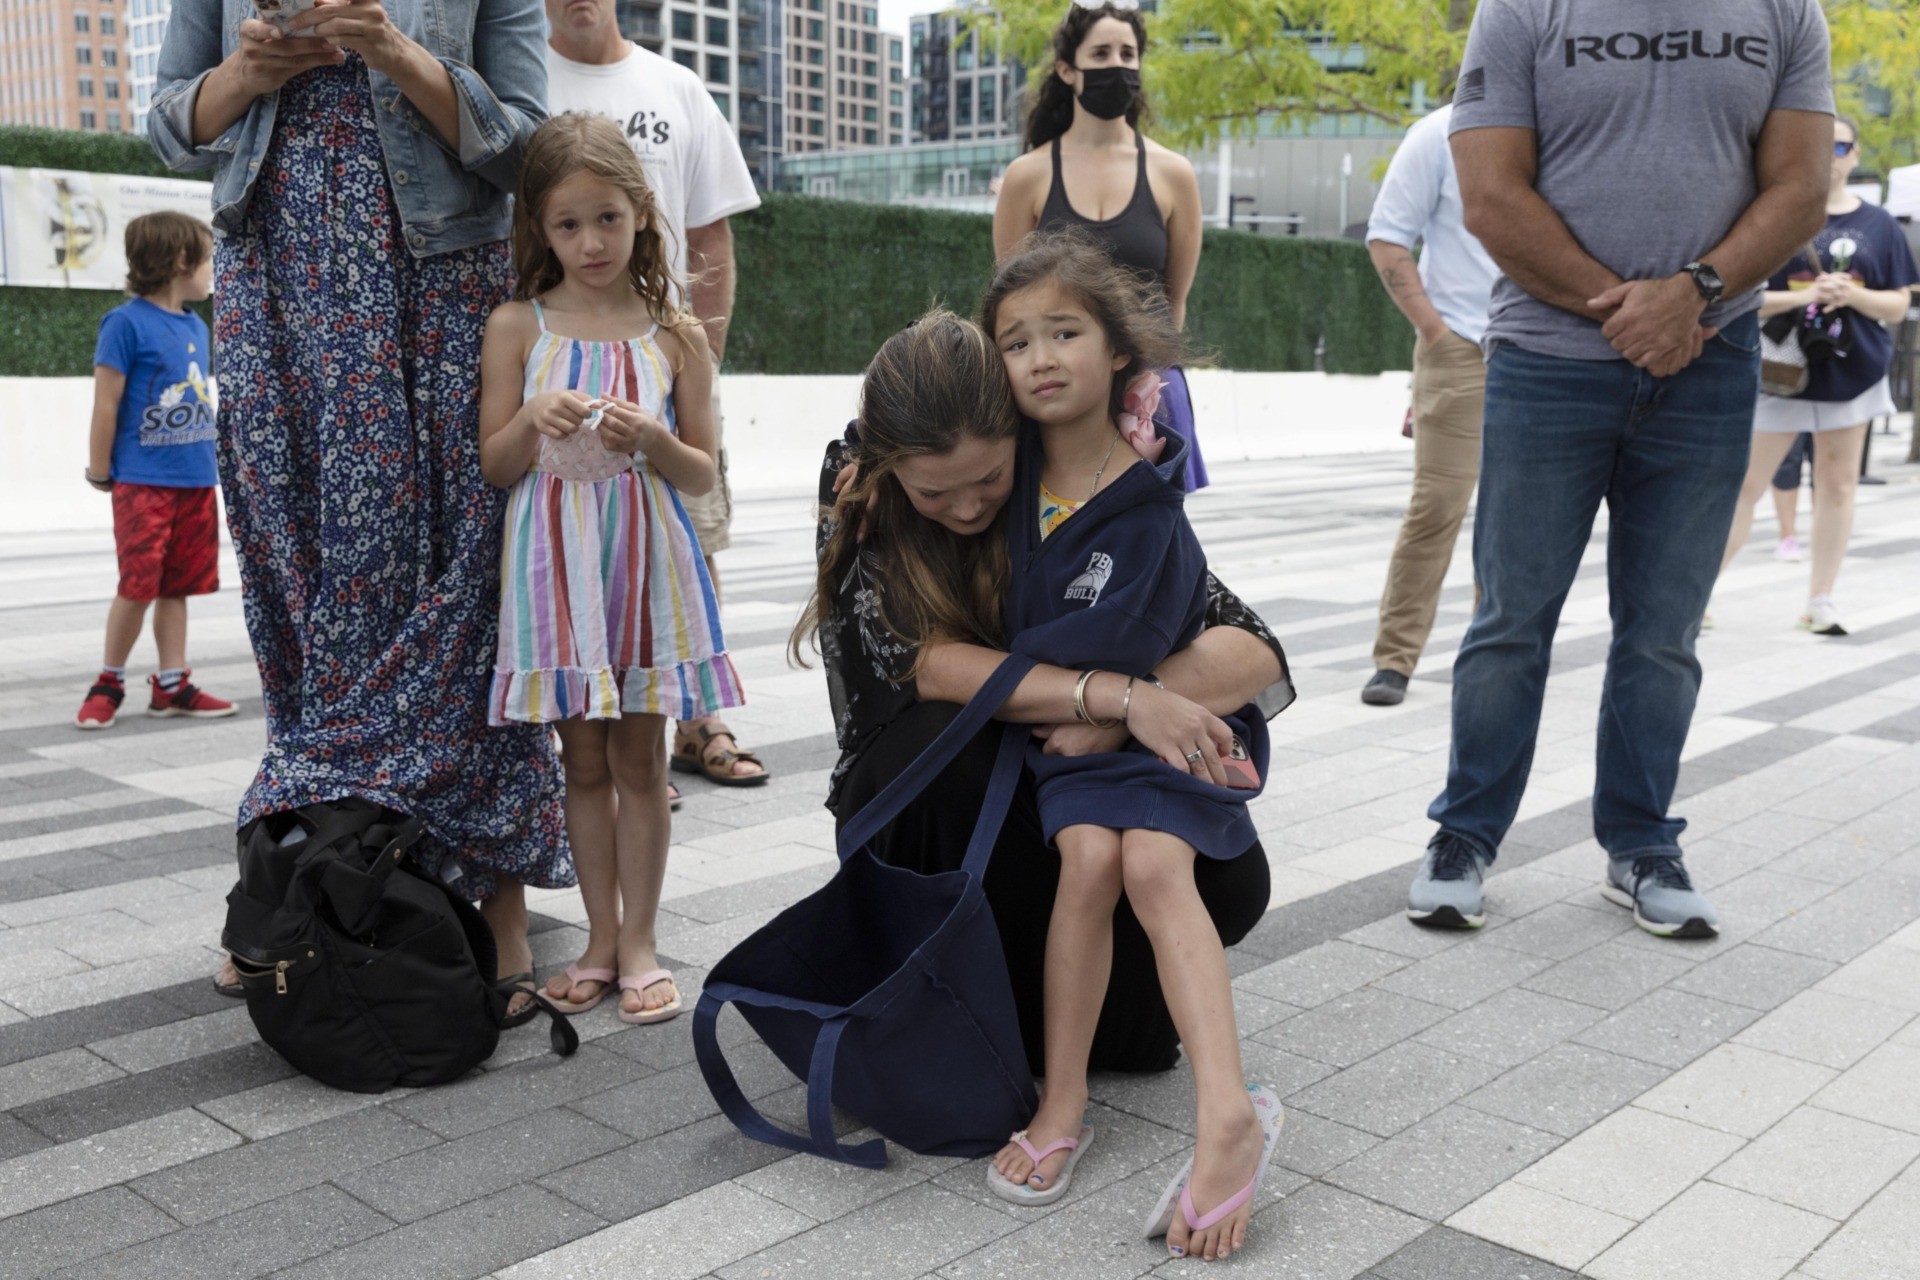 Ingrid Hammond, center, hugs her daughter Brigit during a ceremony at the Massachusetts Fallen Heroes Memorial, Saturday, Aug. 28, 2021, in Boston. People gathered at the memorial to honor the U.S. service members killed in a suicide bombing at the airport in Kabul, Afghanistan, including Marine Sgt. Johanny Rosario Pichardo from Lawrence, Mass. (AP Photo/Michael Dwyer)